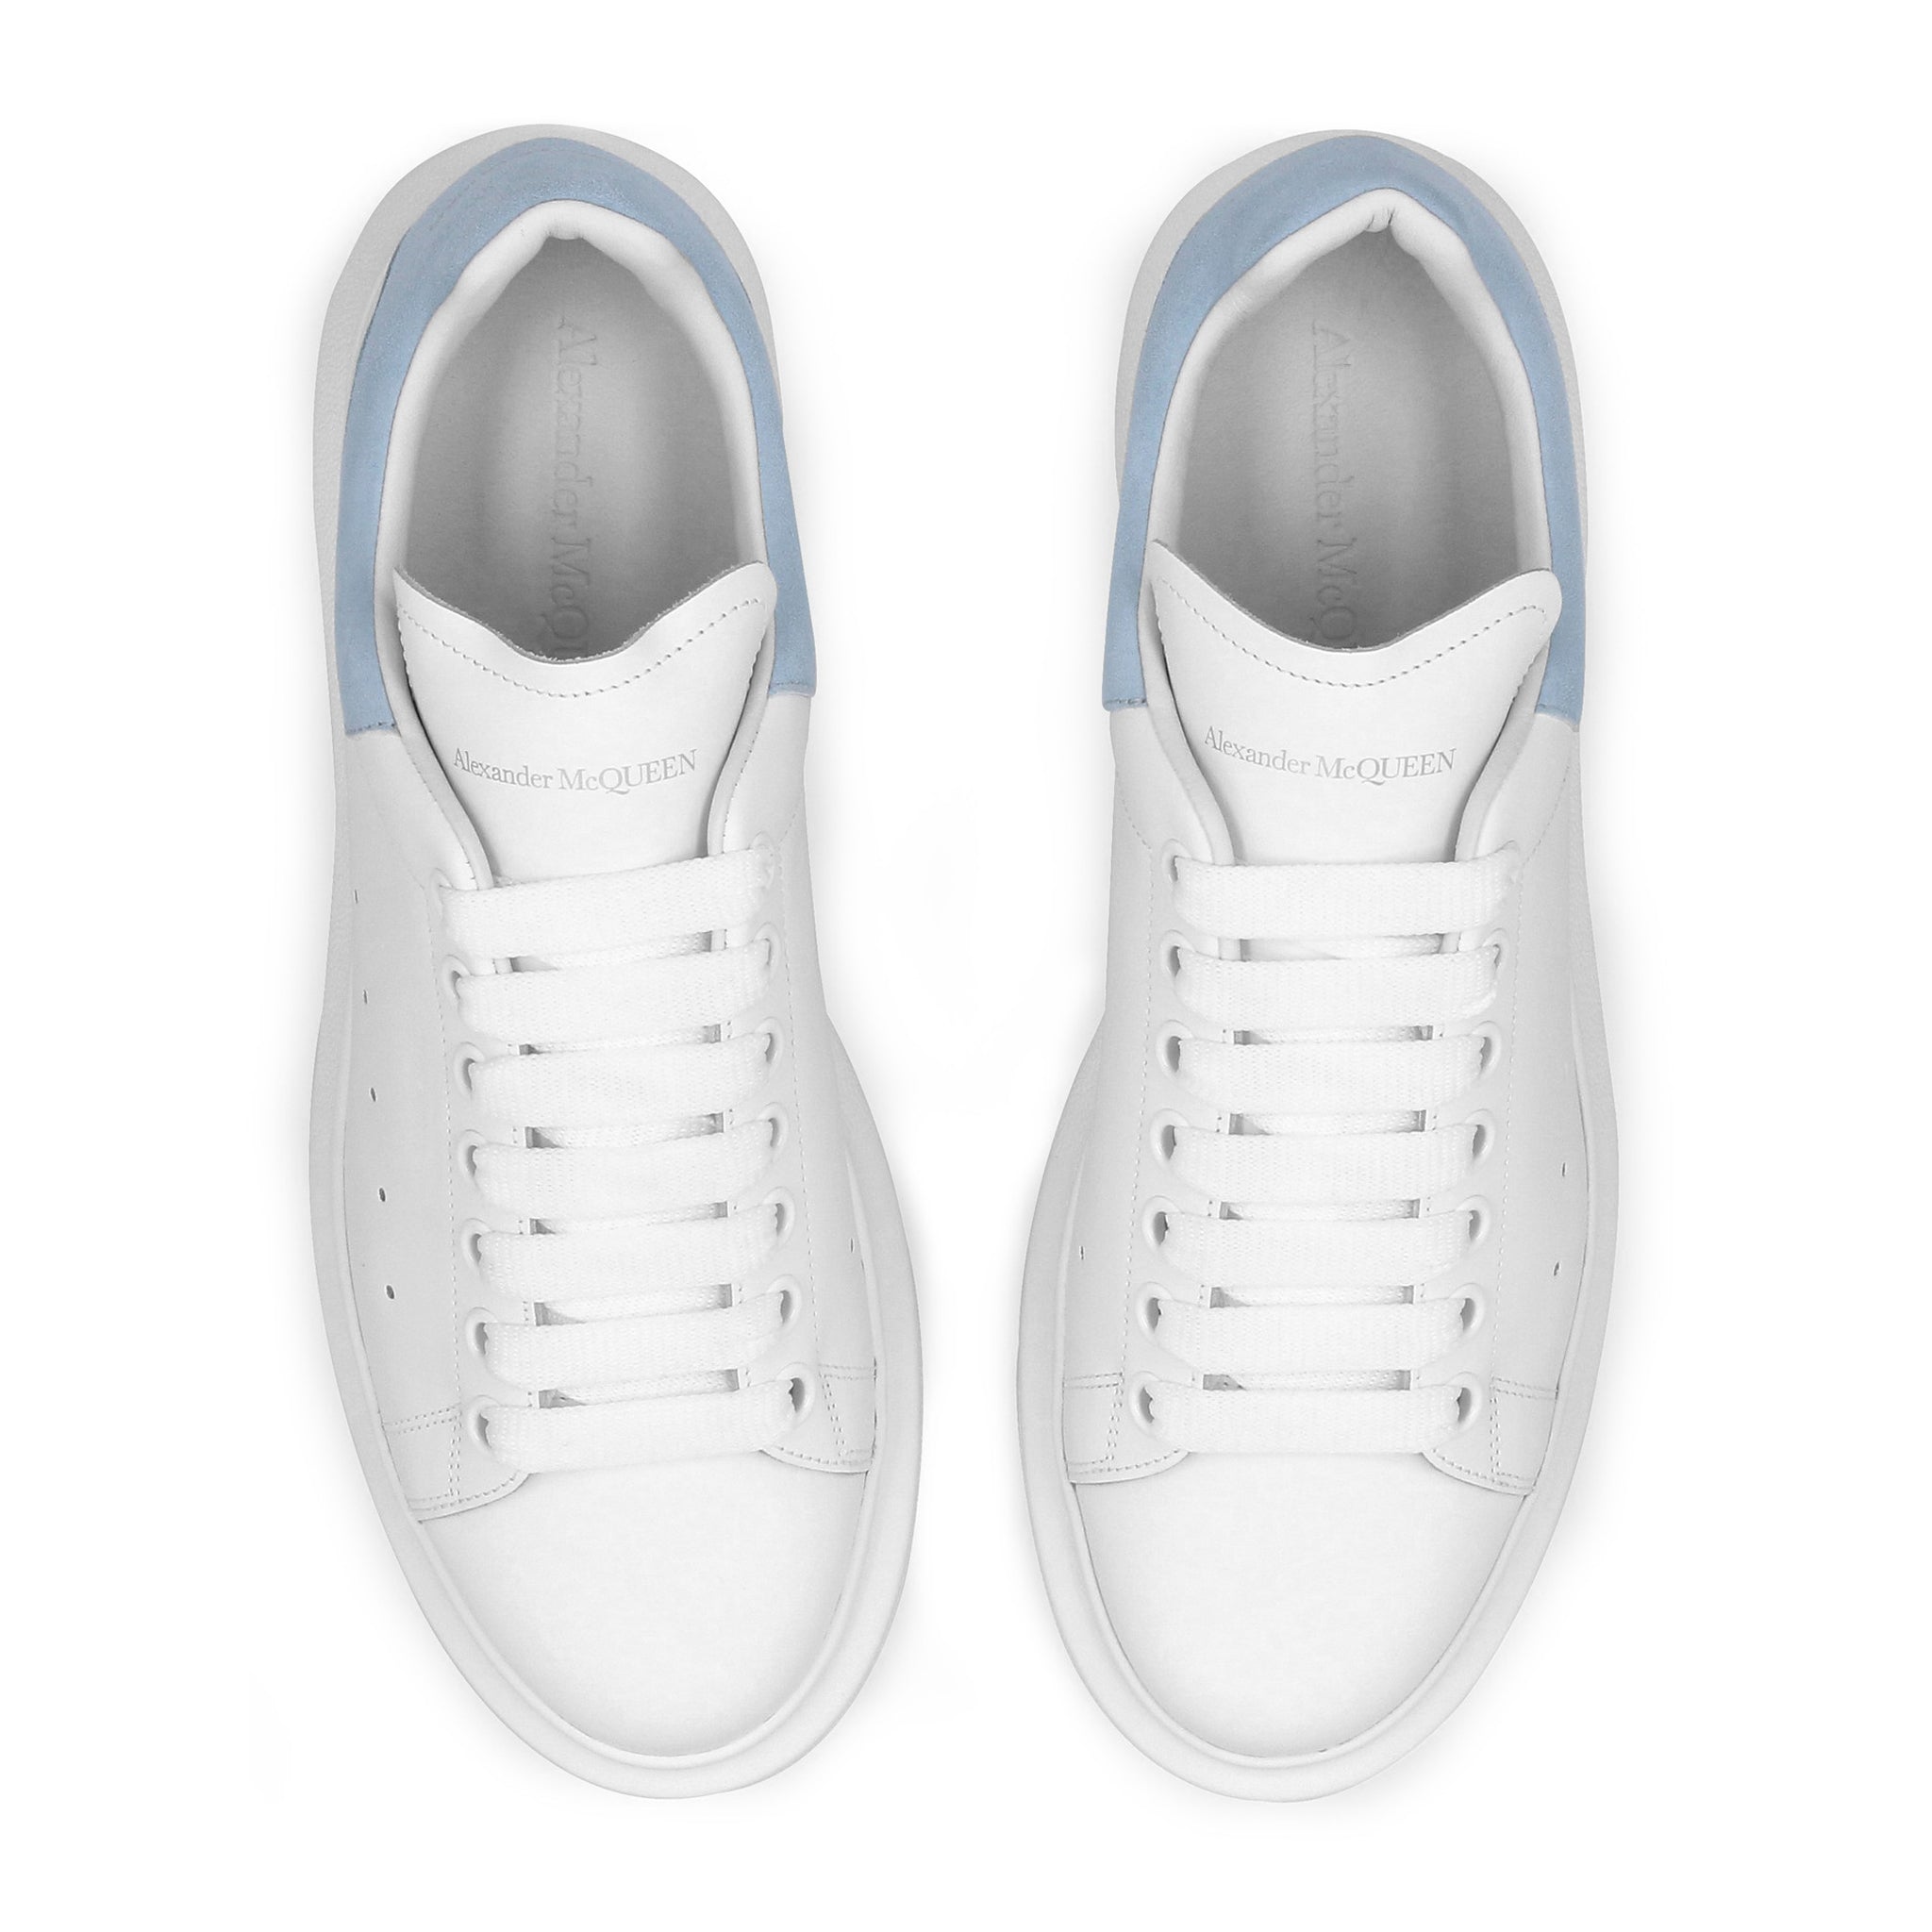 Top view of Alexander Mcqueen Raised Sole White Blue Sneaker